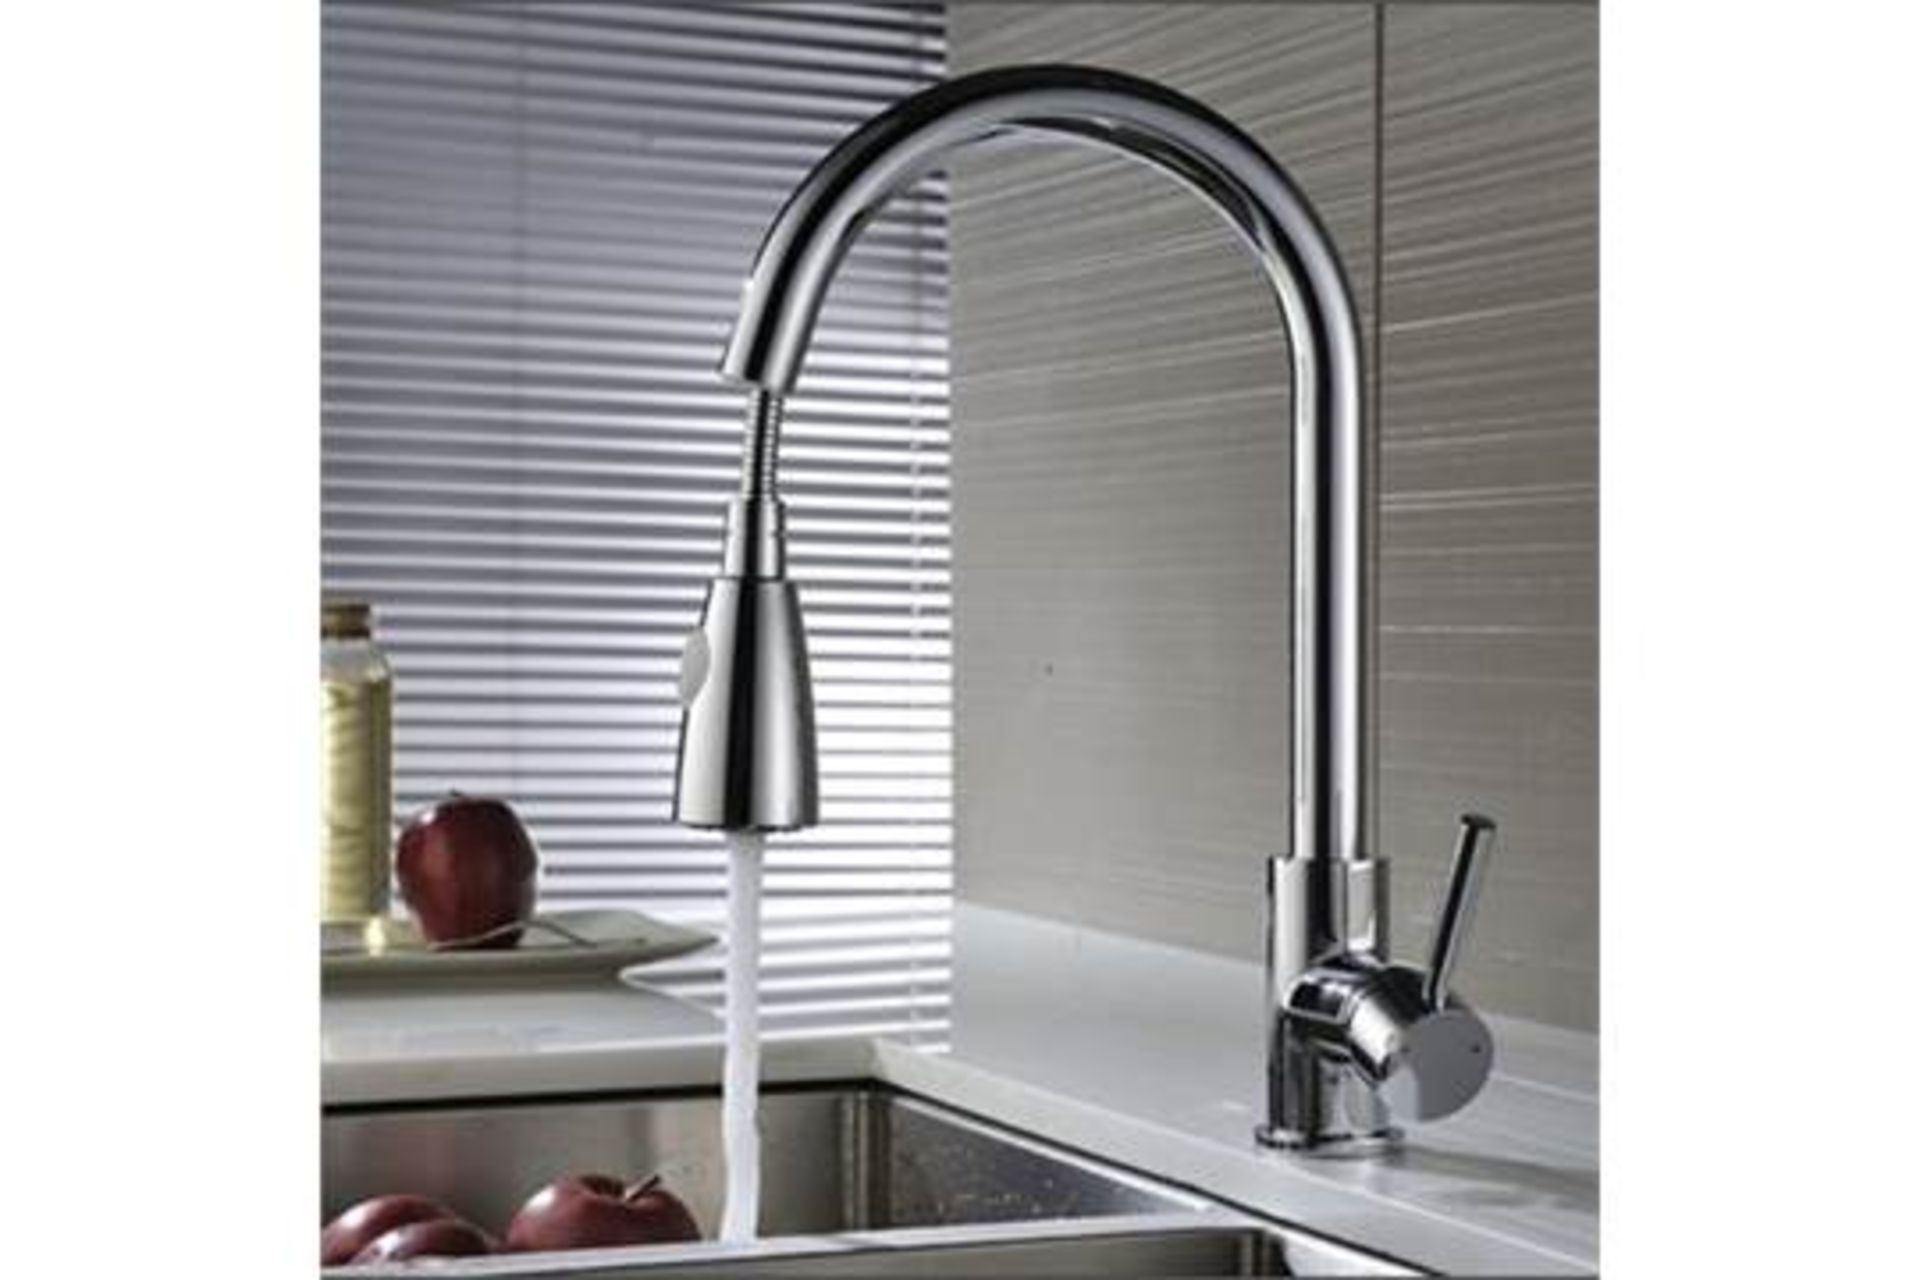 (O292) Della Chrome Plated Kitchen Mixer Tap - Pull Out Spray. RRP £253.98. Contemporary with an